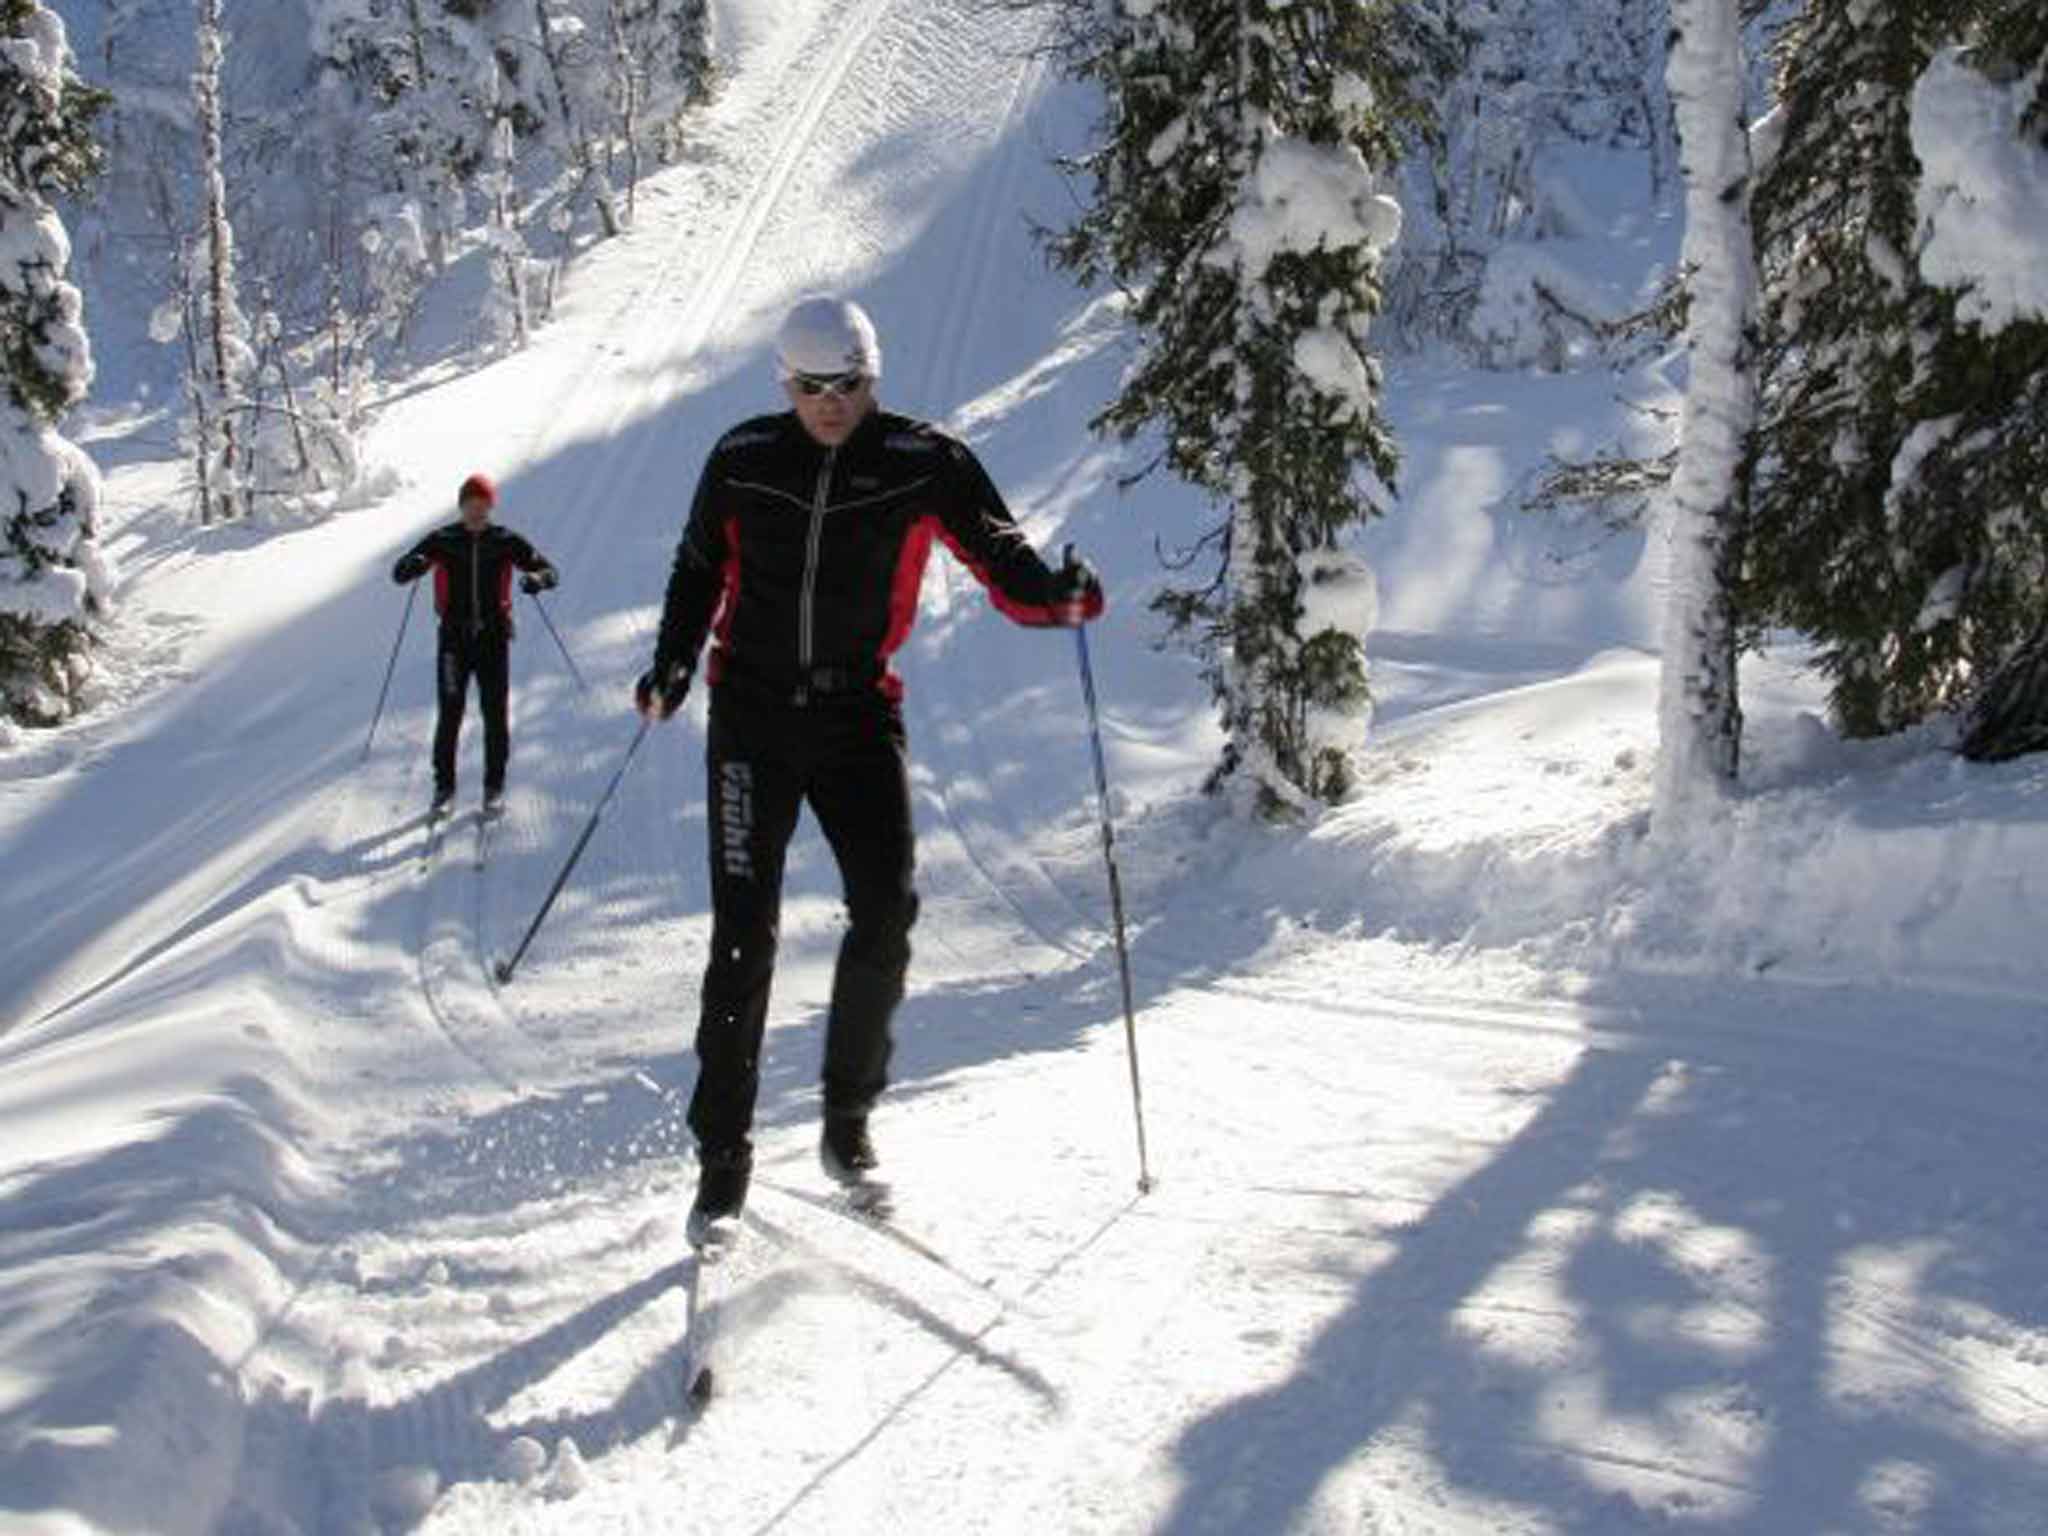 Pole position: Cross-country skiing in Yllas, Finland